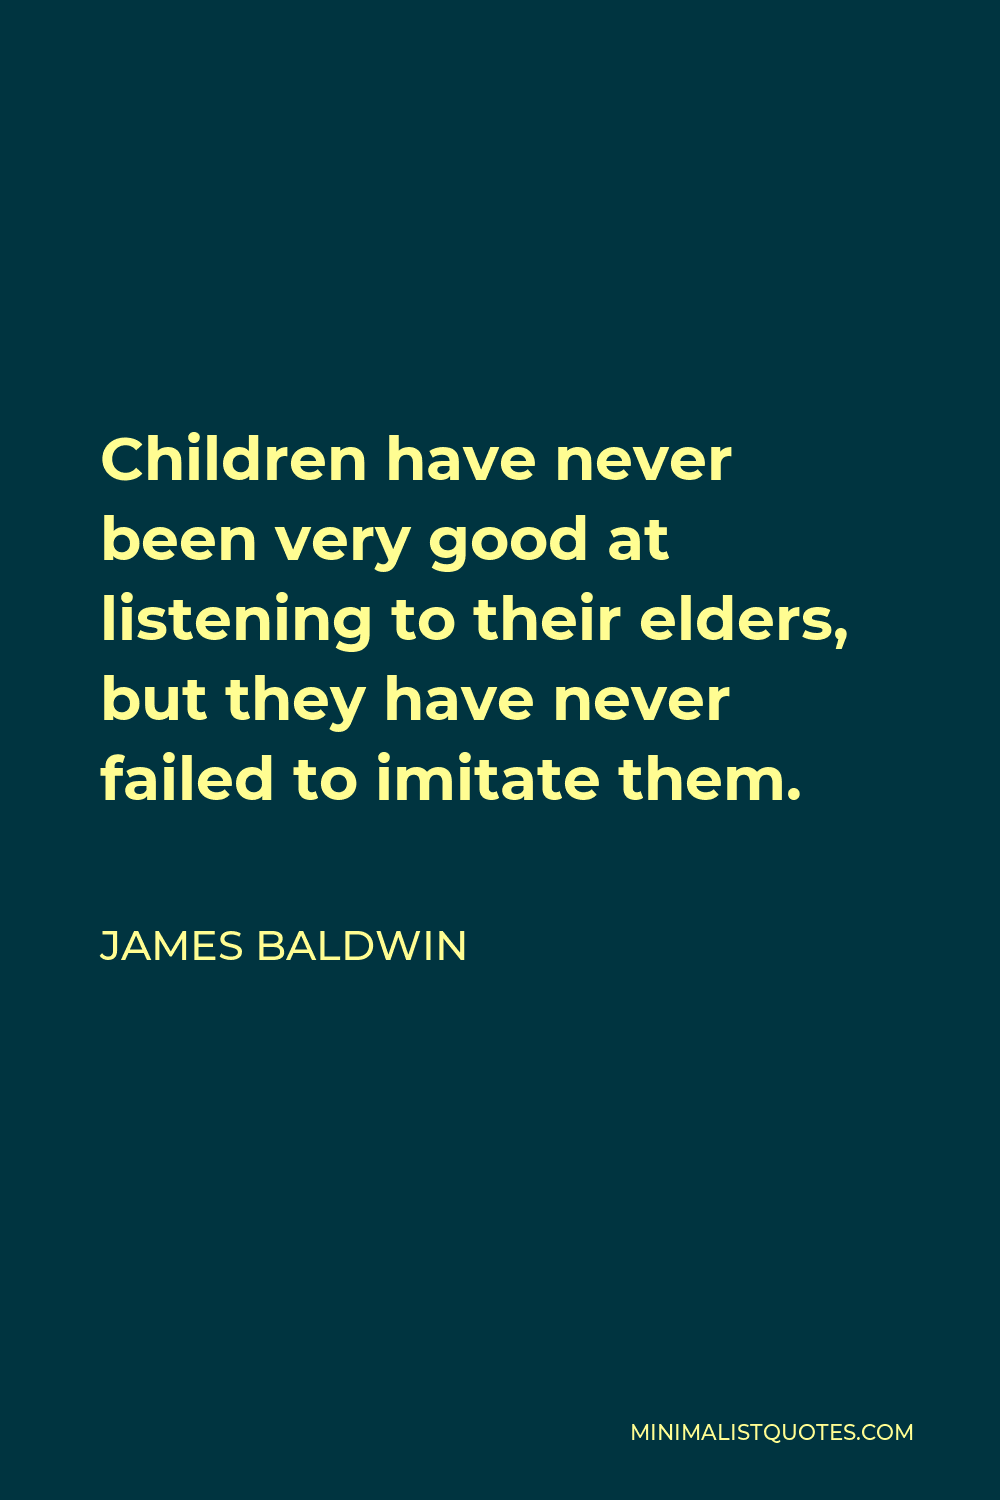 James Baldwin Quote - Children have never been very good at listening to their elders, but they have never failed to imitate them.